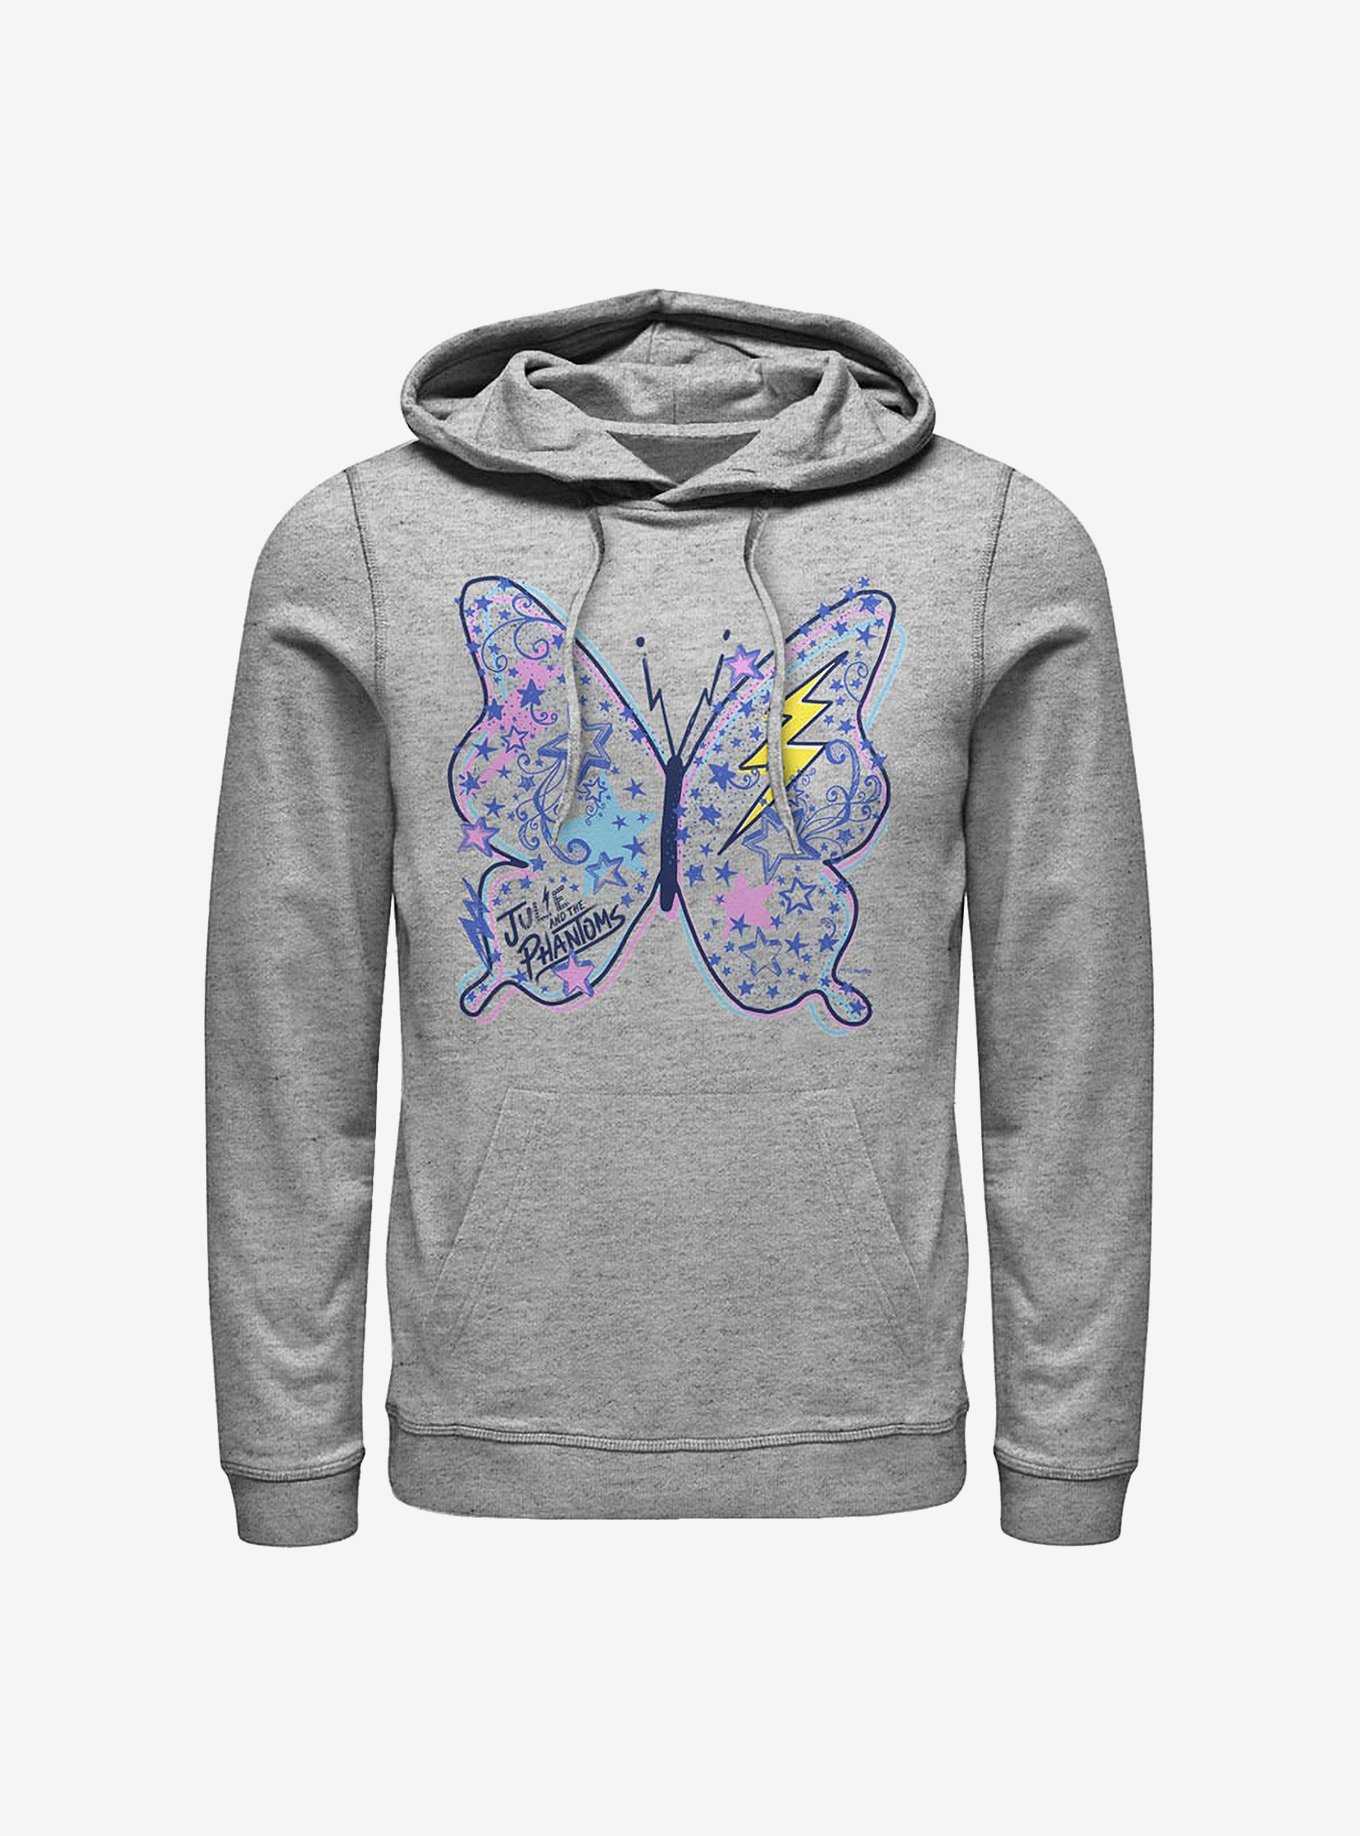 Julie And The Phantoms Butterfly Doodles Hoodie, , hi-res